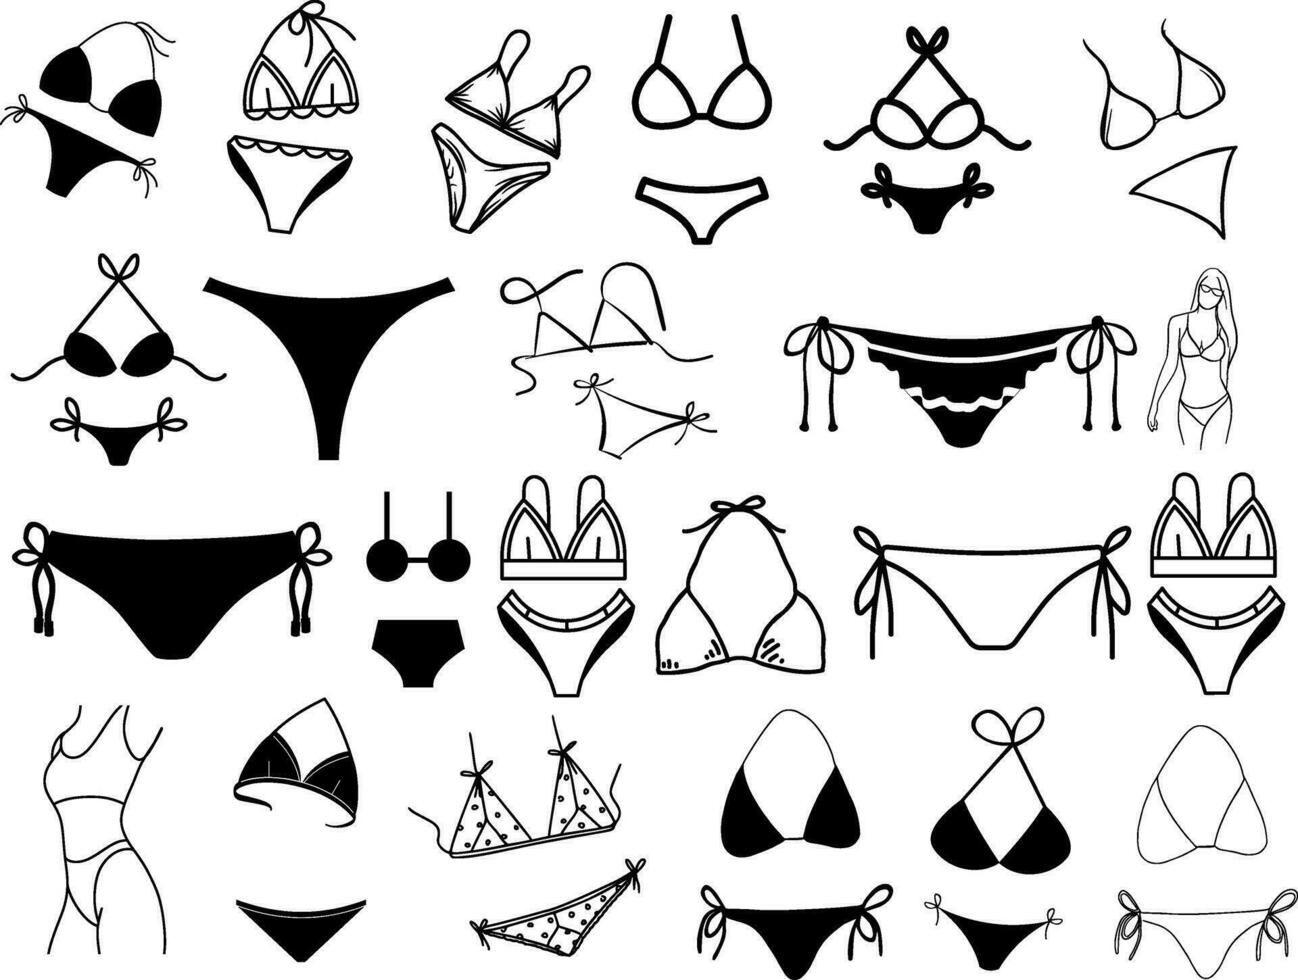 Celebrate National Bikini Day with this icon set of swimsuits in various styles and patterns, ideal for summer and beach projects, on white background. vector